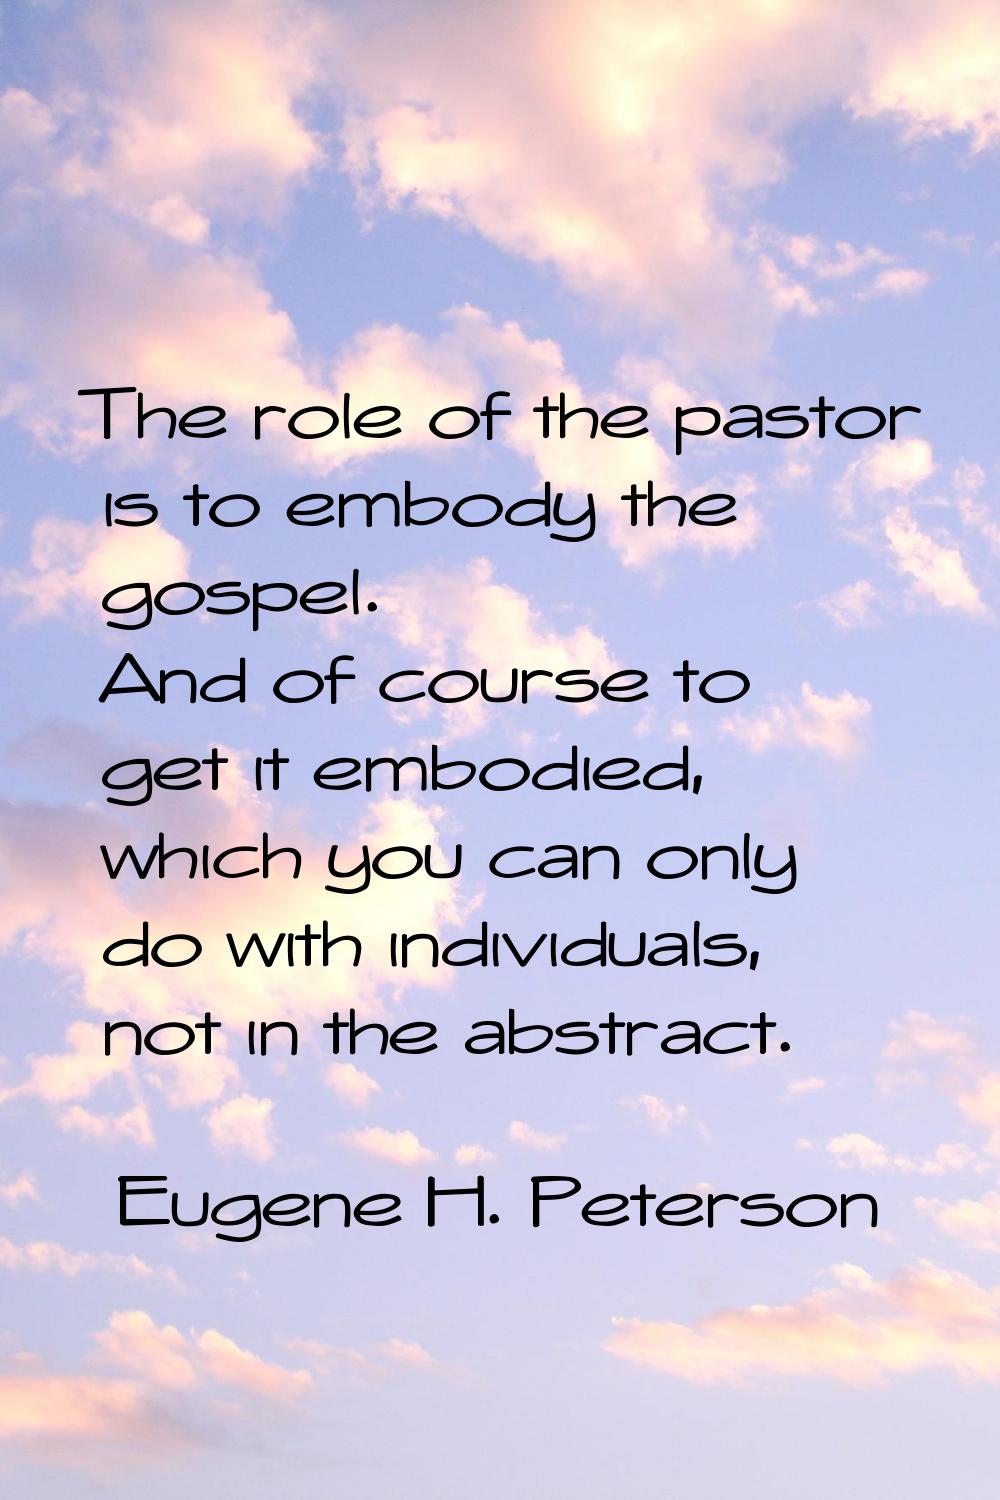 The role of the pastor is to embody the gospel. And of course to get it embodied, which you can onl